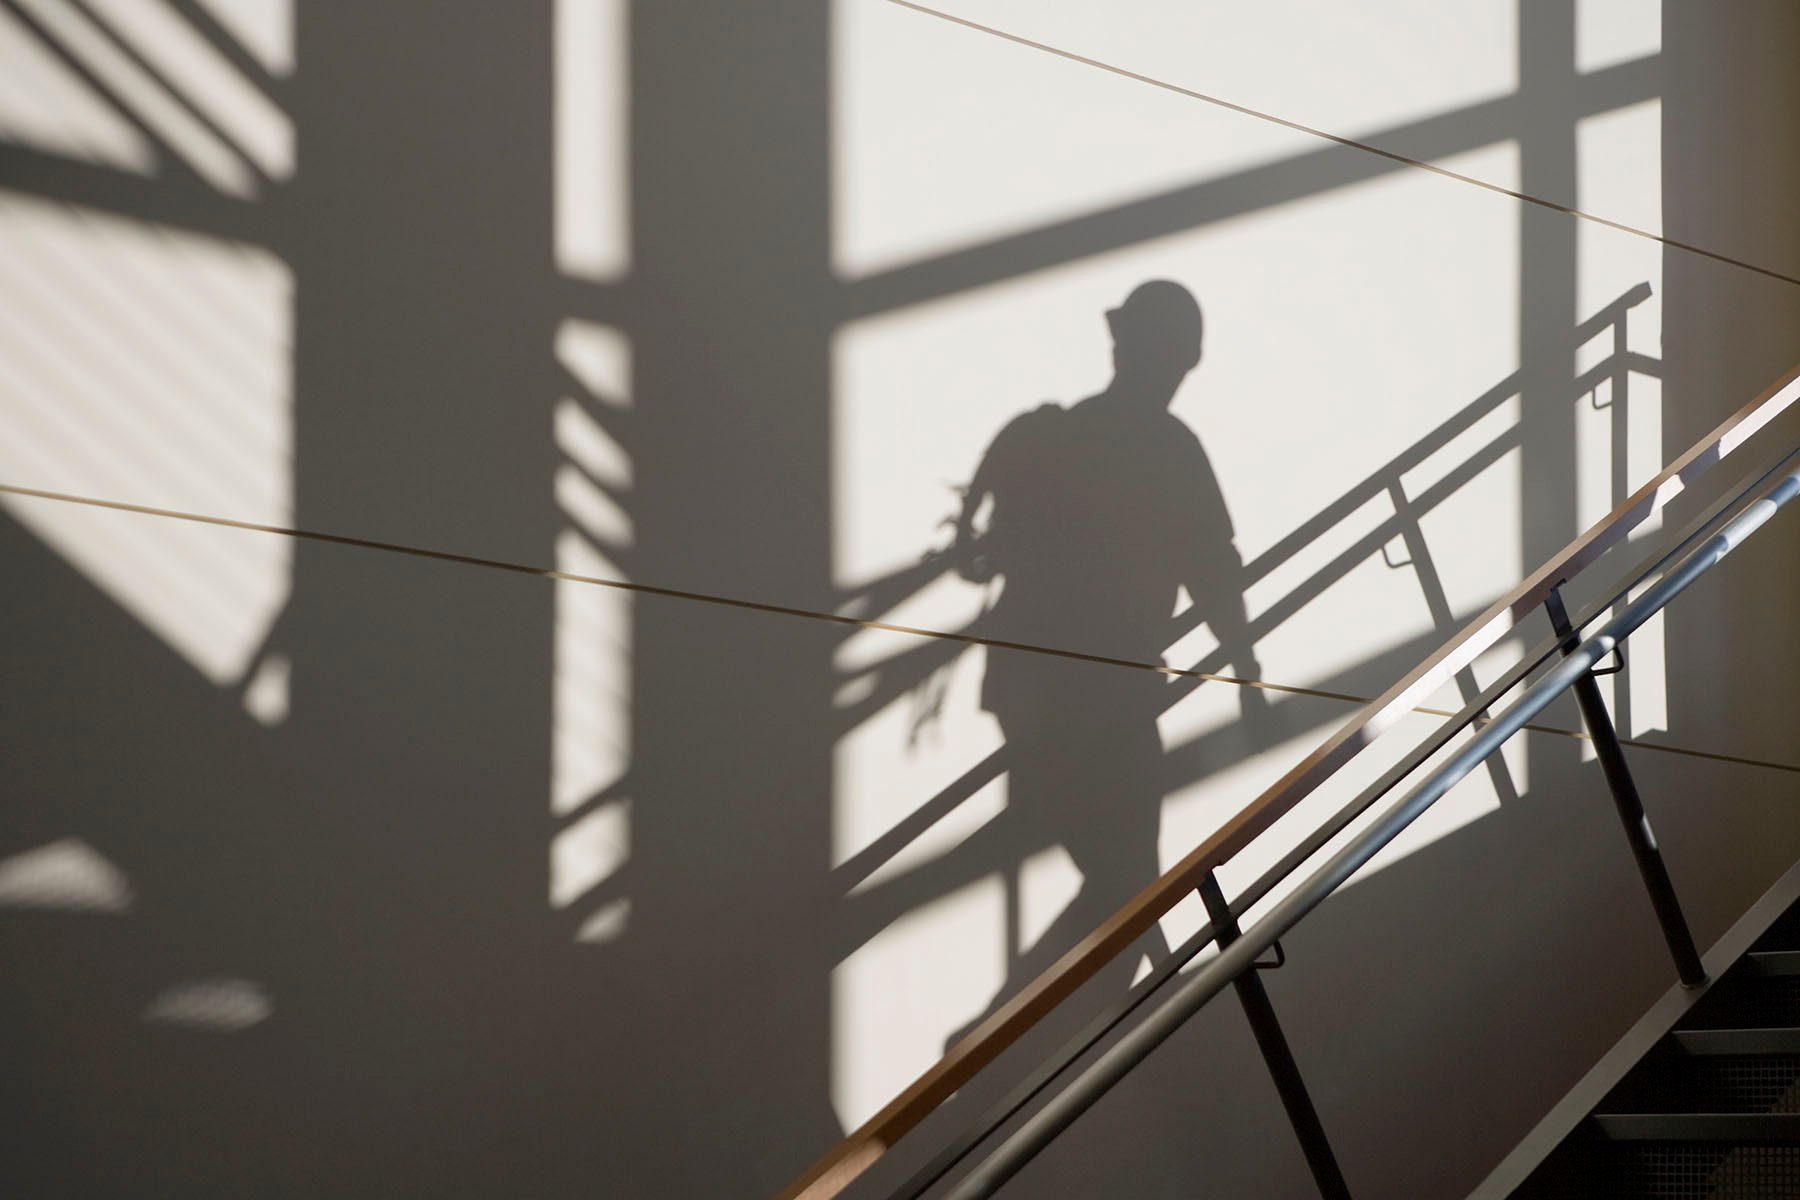 Silhouetted student's shadow is seen as they go up stairs on a college campus.